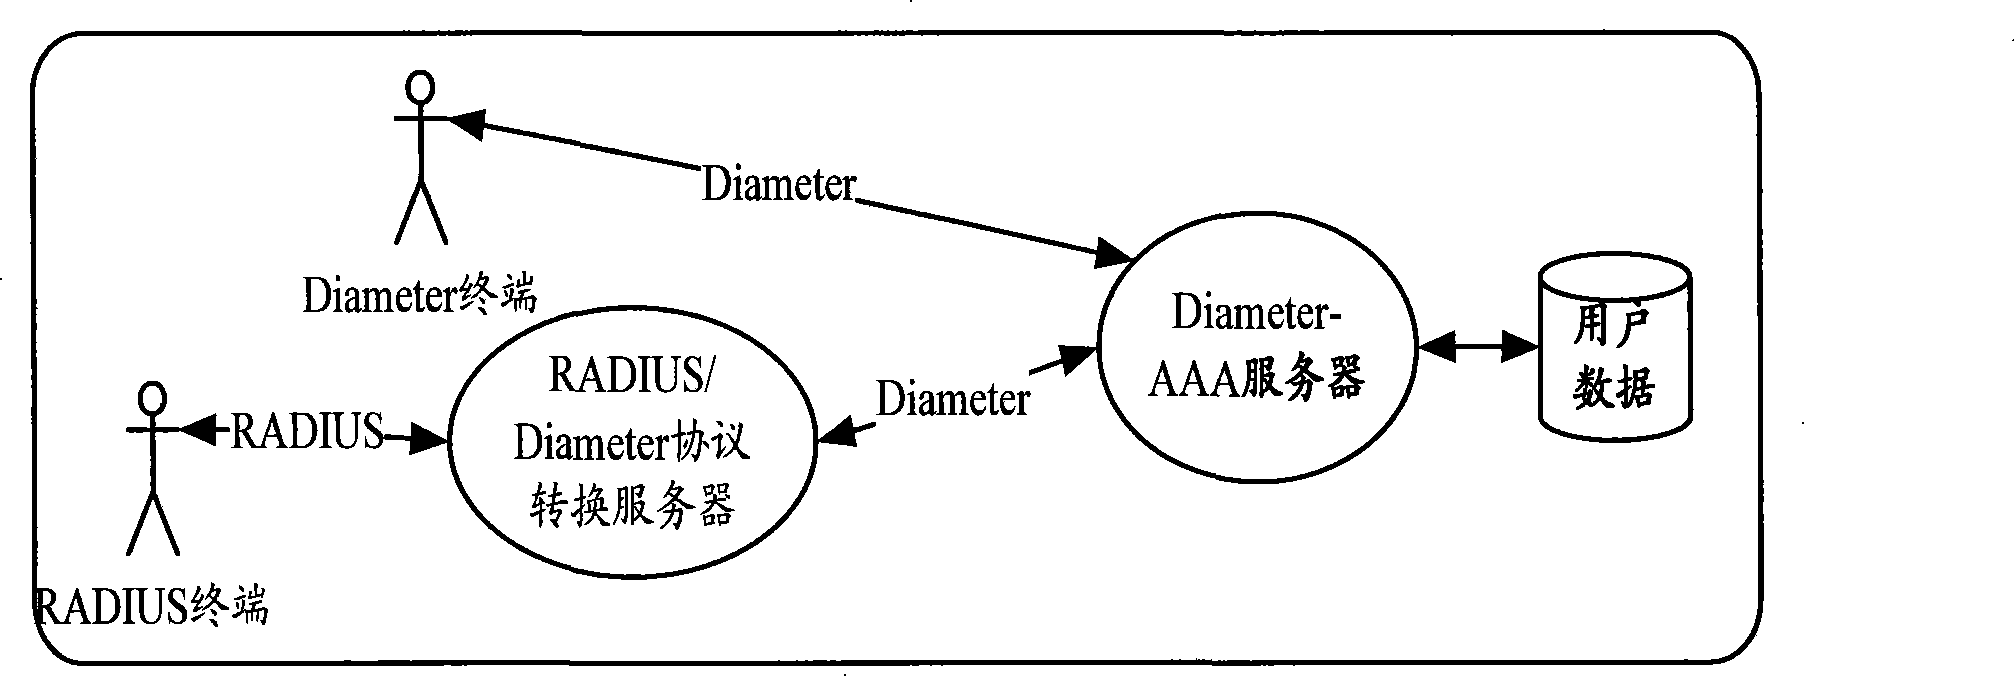 Diameter-AAA server supporting RADIUS protocol and working method thereof